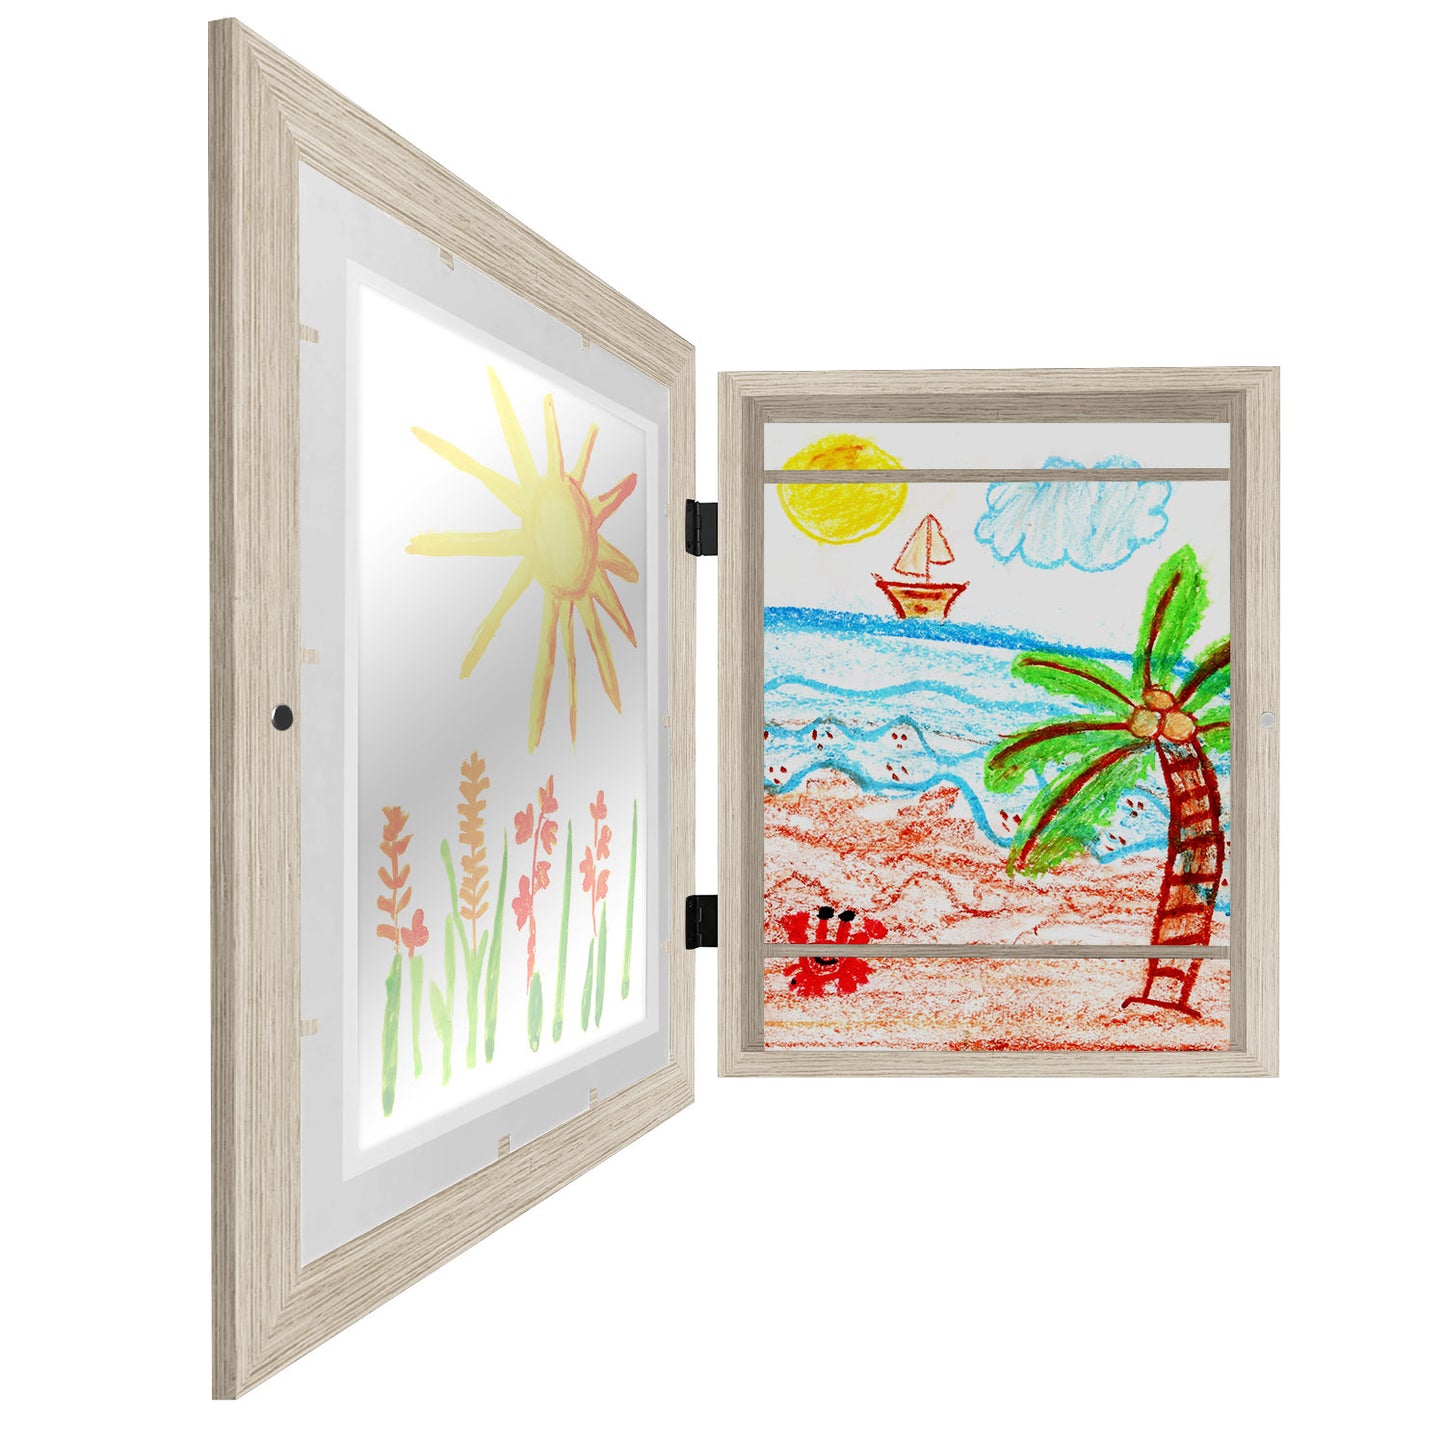 Americanflat 10x12.5 Kids Art Frame with Mat for 8.5x11, 2 Pack